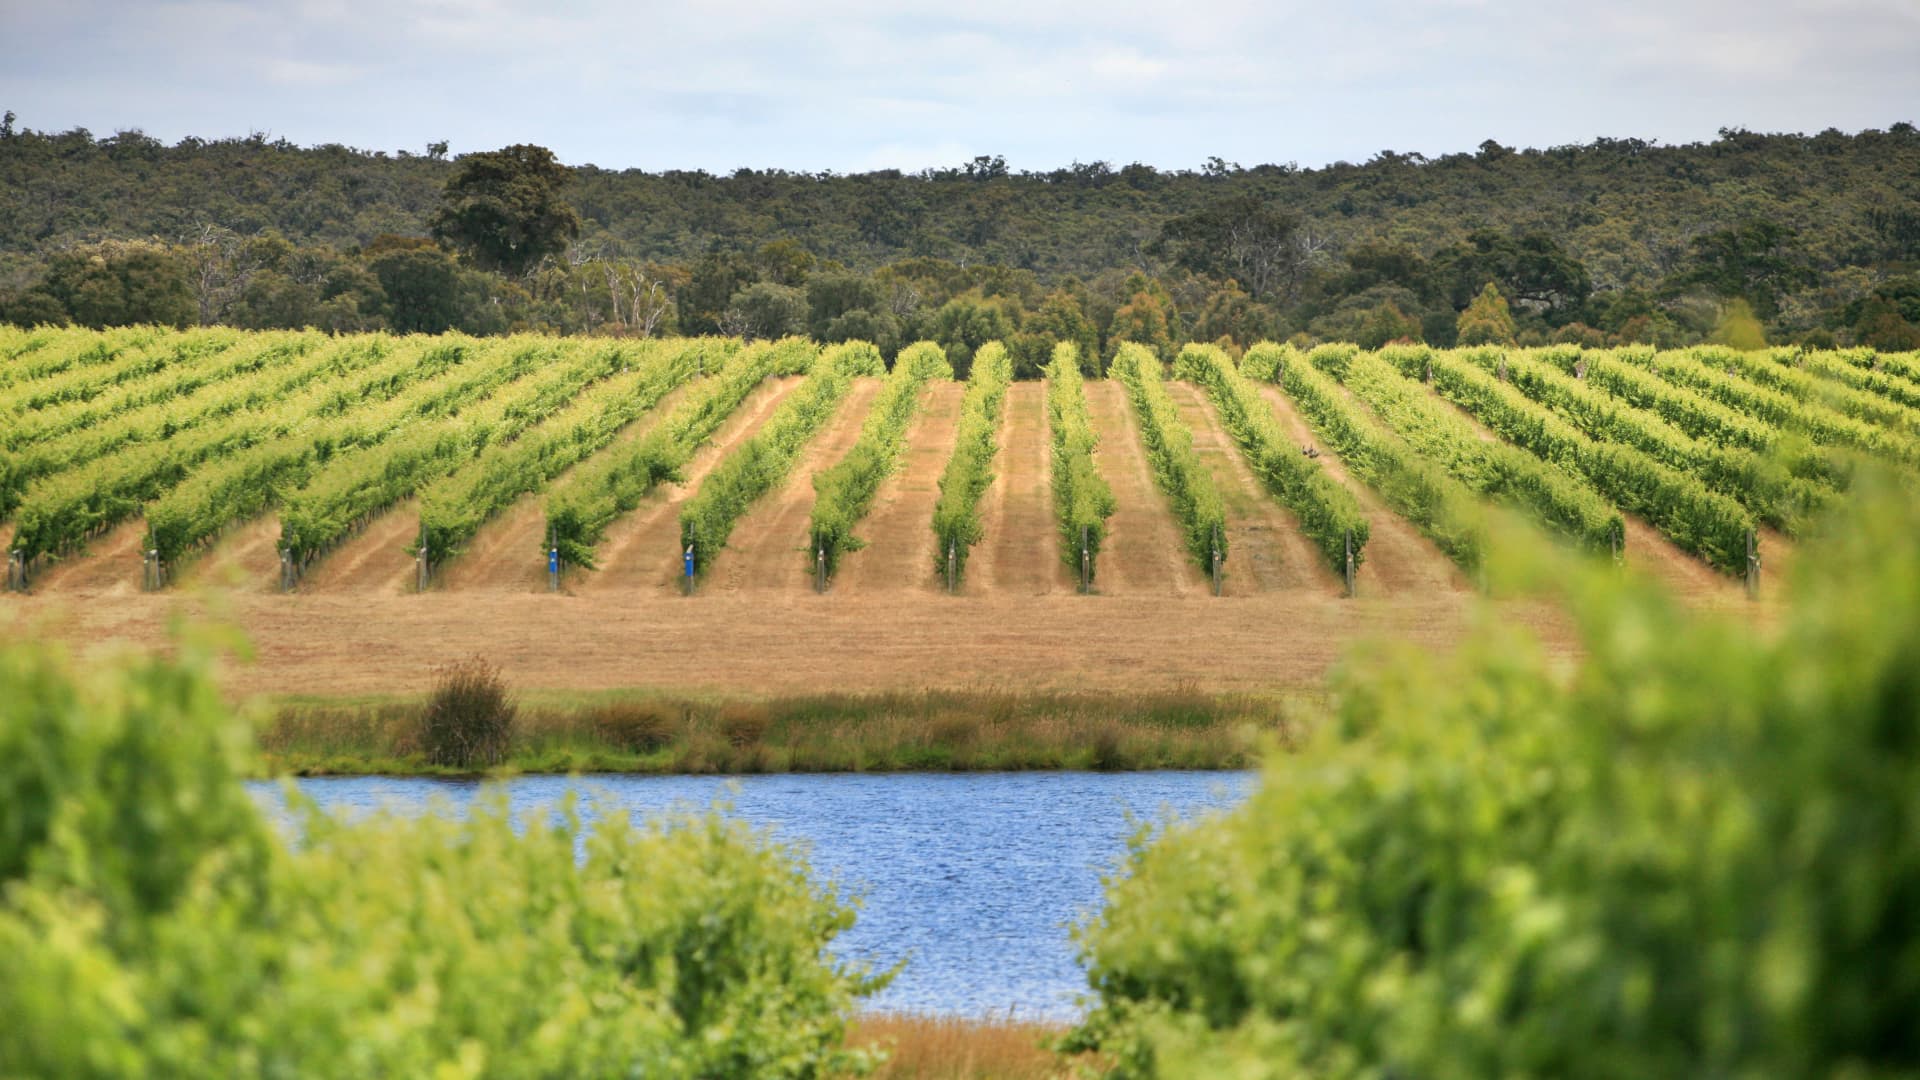 In addition to vineyards, Margaret River has olive groves, berry farms and chocolate factories, and almost all provide tastings and picnic portions for takeaway.